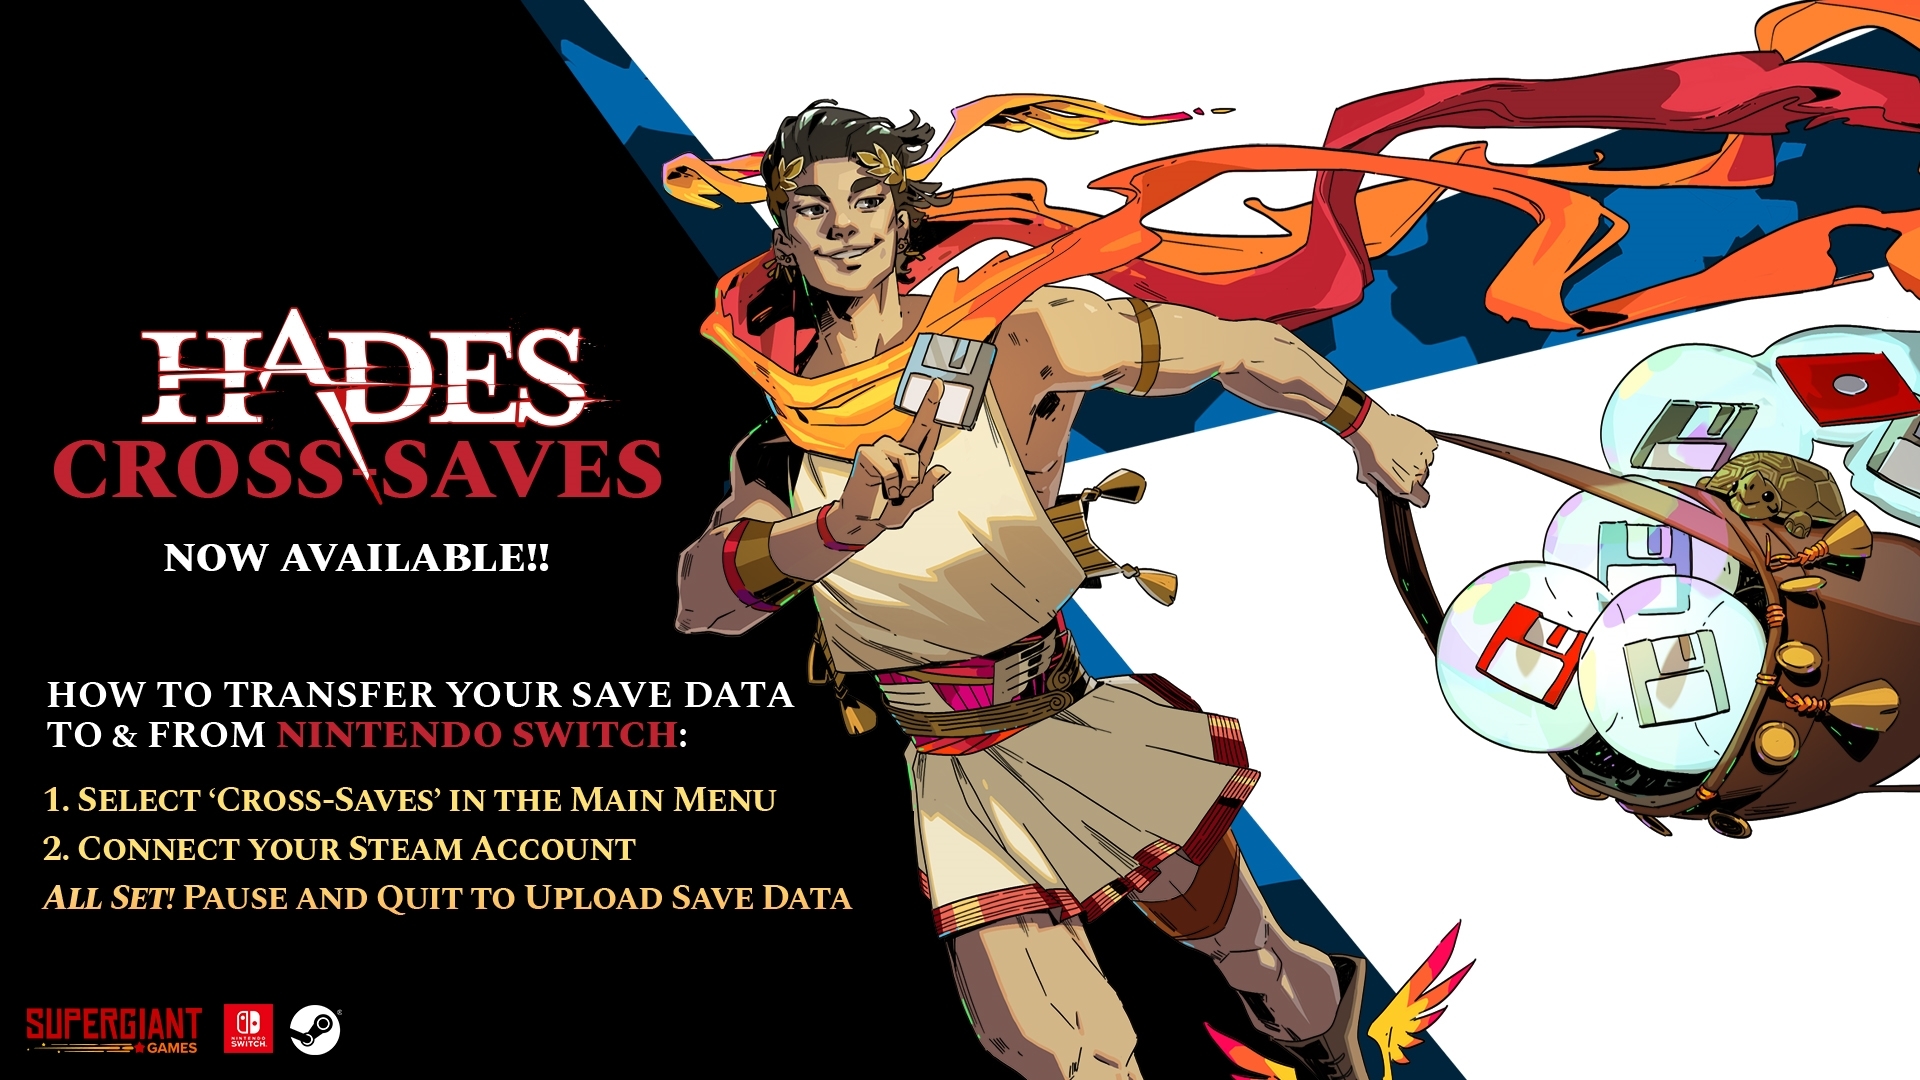 Hades 2' release window, early access, trailer, story, and Melinoë details